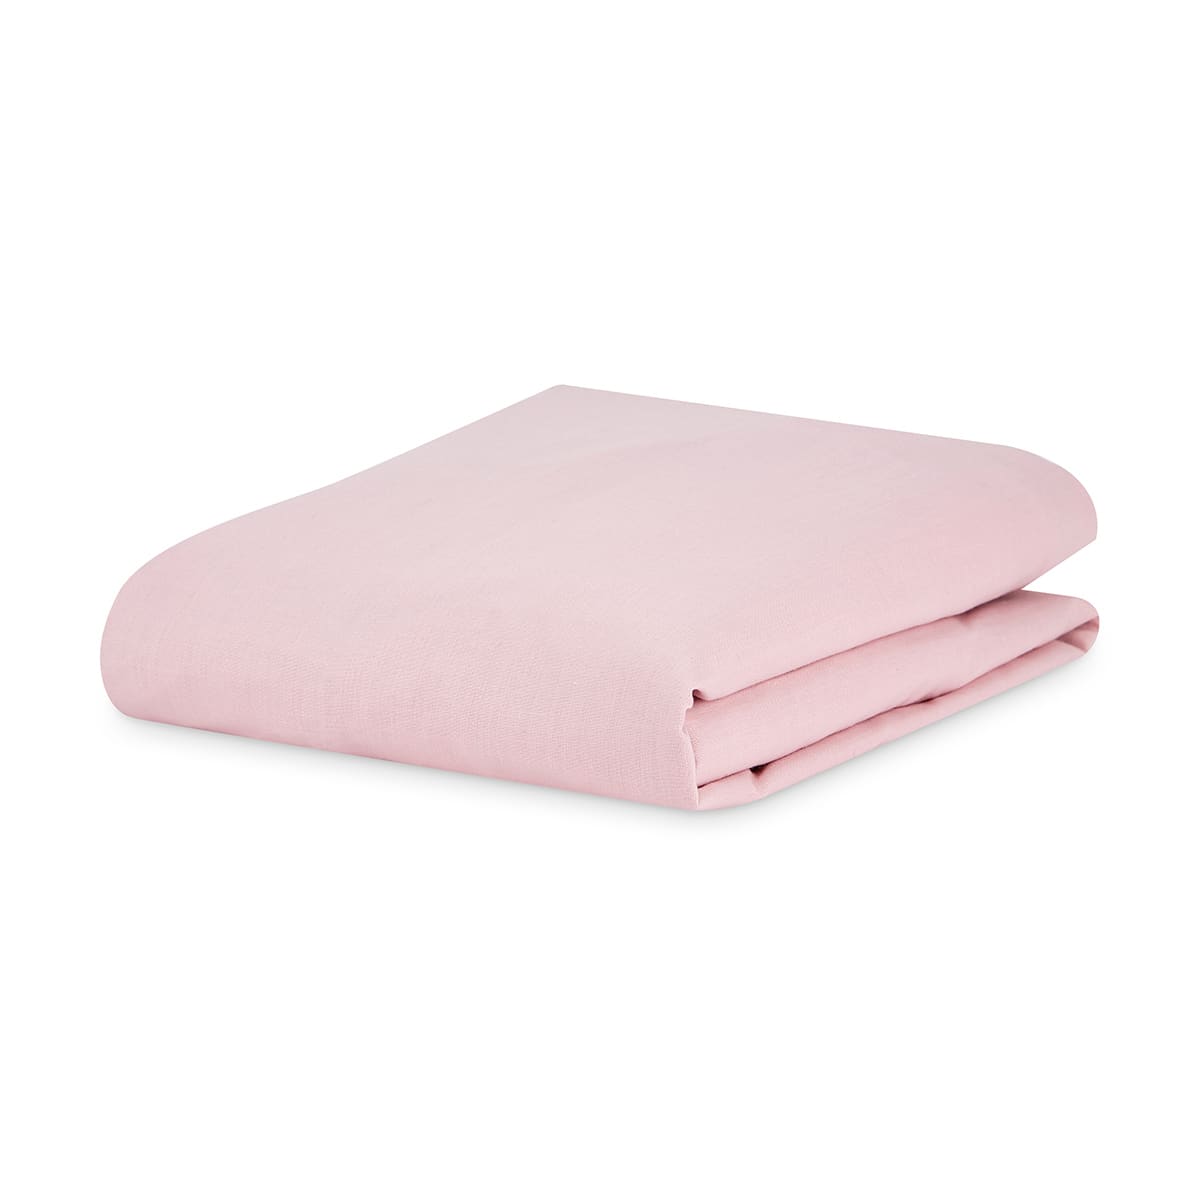 180 Thread Count Fitted Sheet - King Single Bed, Pink - Kmart